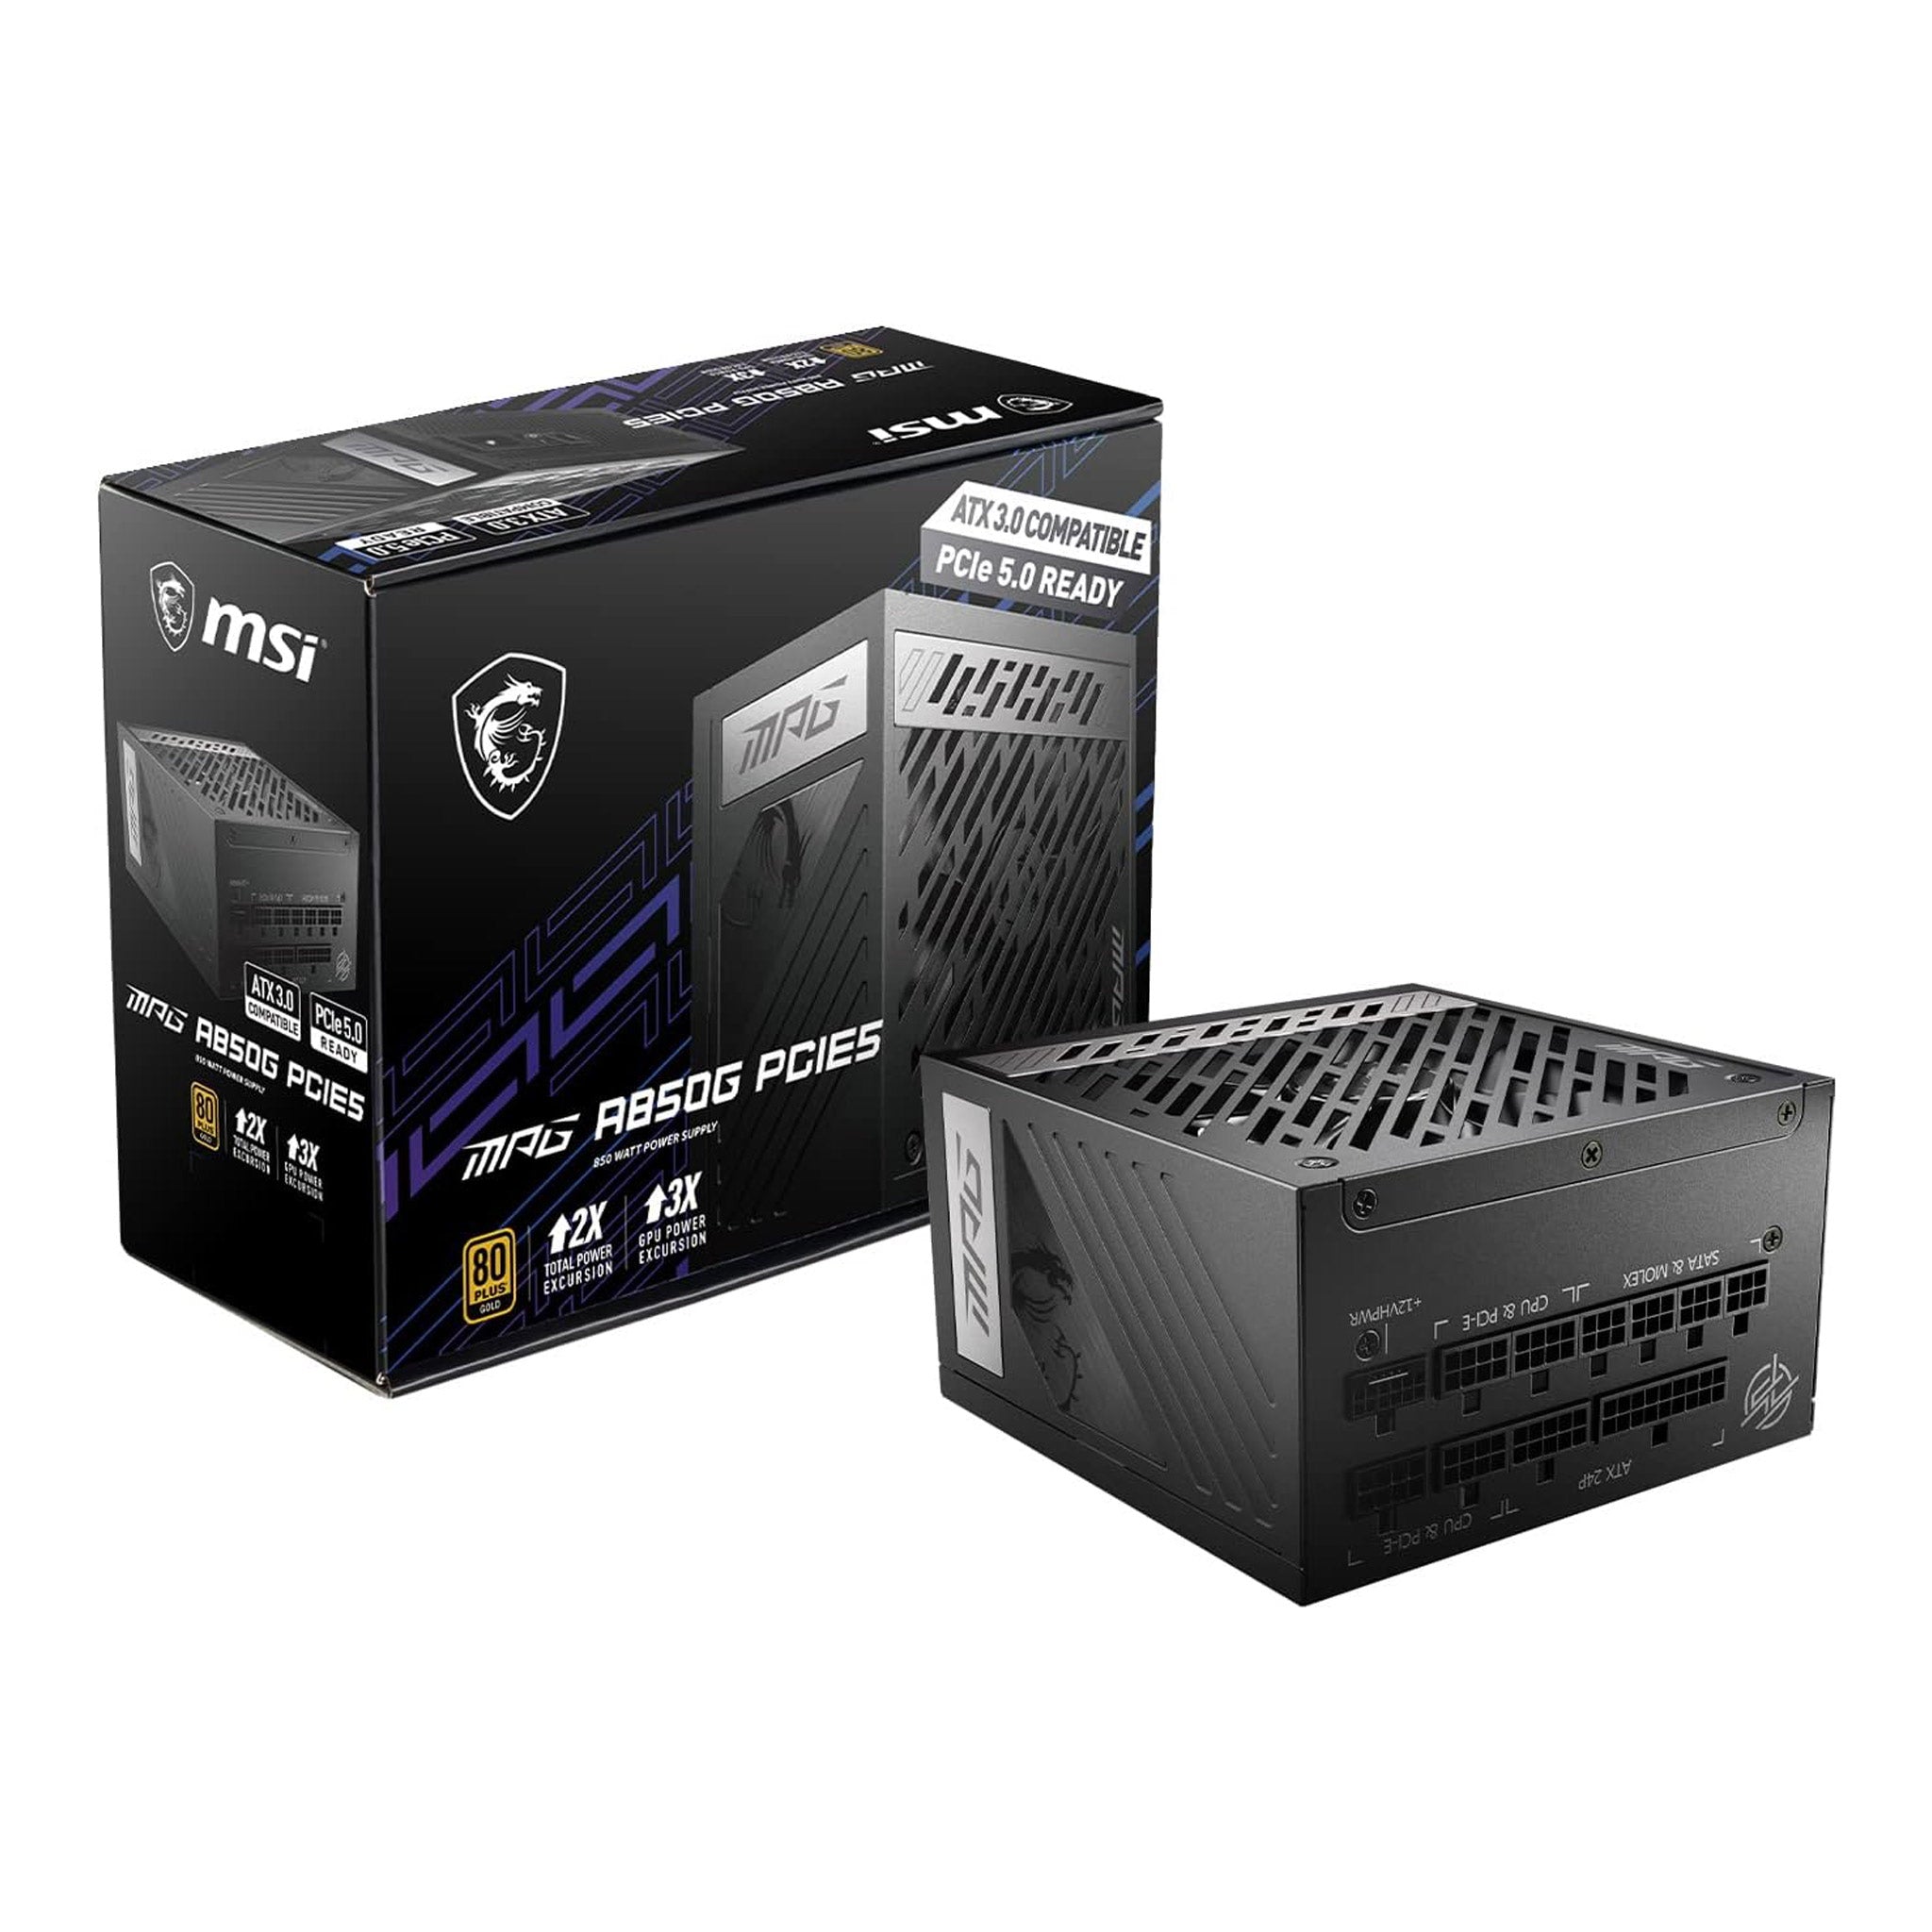 MSI Introduces White A850GL ATX 3.0 Power Supply: 850W Gold